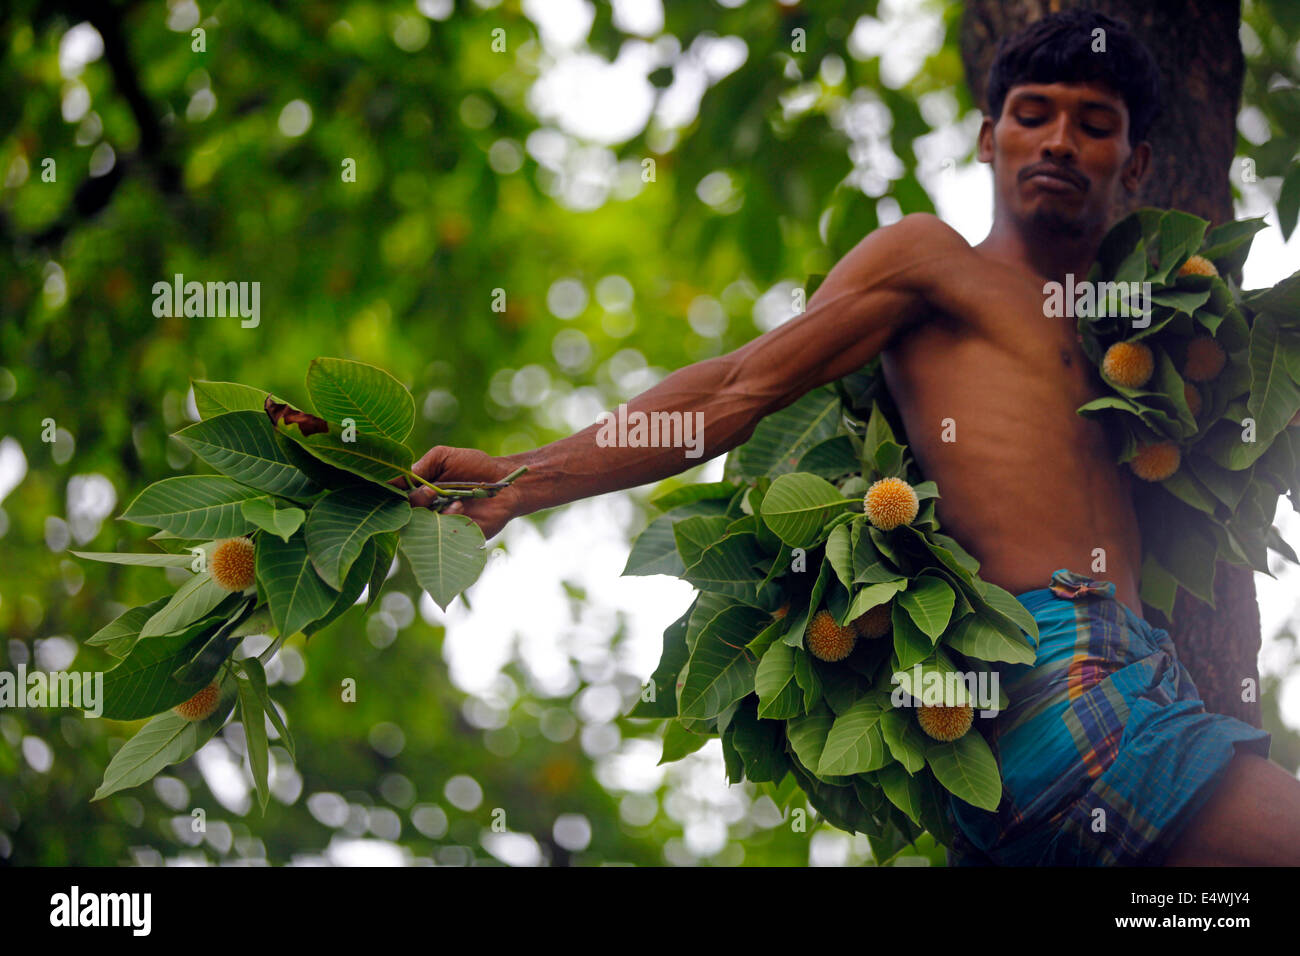 A street hawker collect kodom flower Binomial name Neolamarckia cadamba from tree to sell them in market at Dhaka Stock Photo